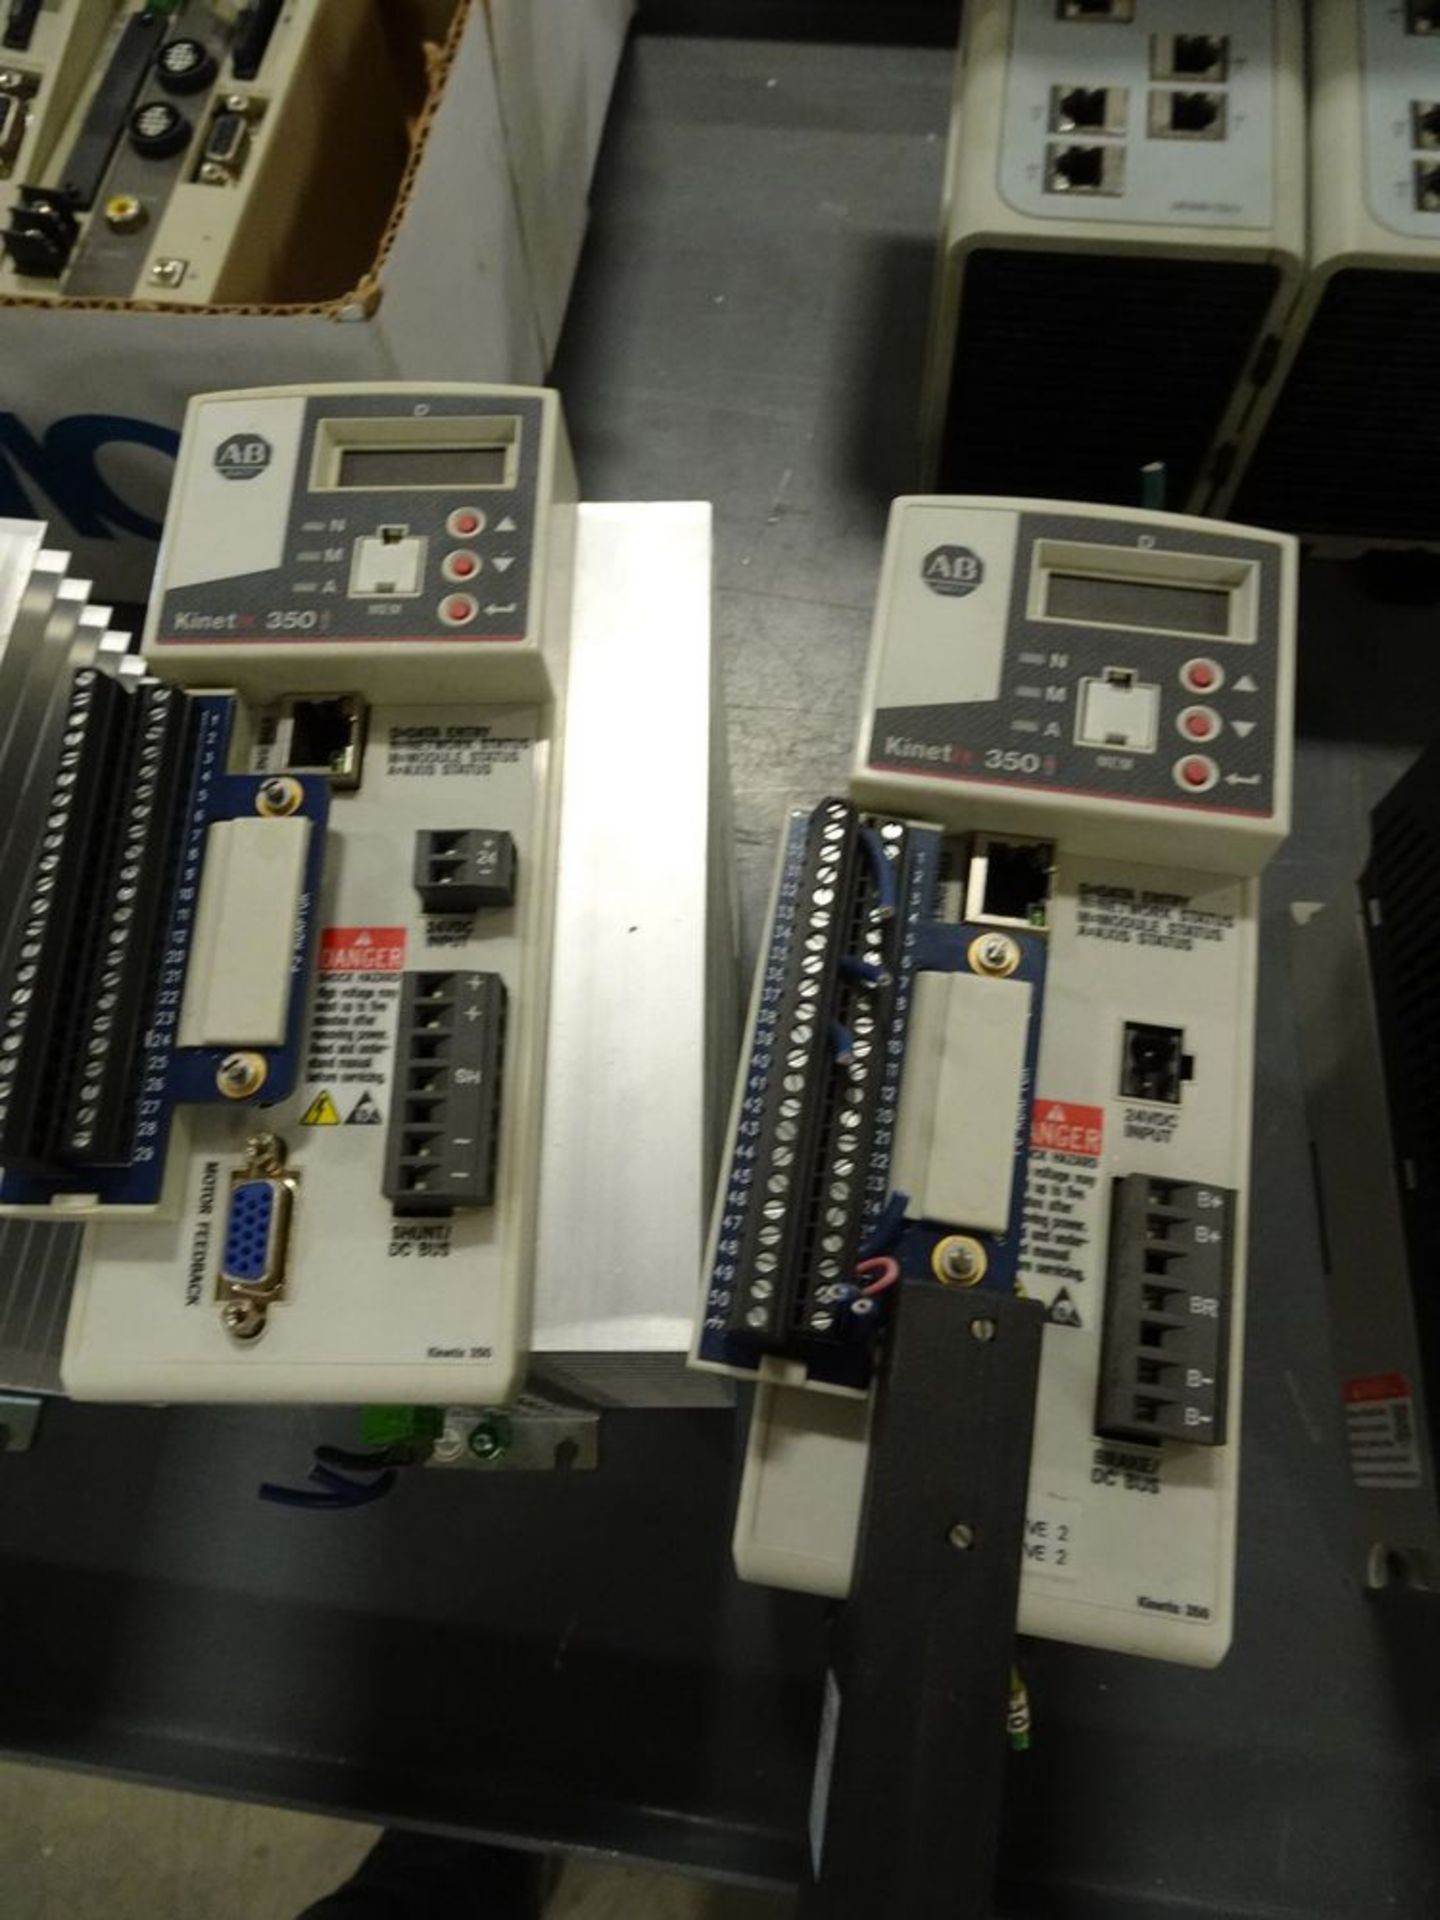 ASSORTED PRODUCT, ALLEN-BRADLEY SWITCHES, POWERFLEX DRIVES, ETC. - Image 3 of 6